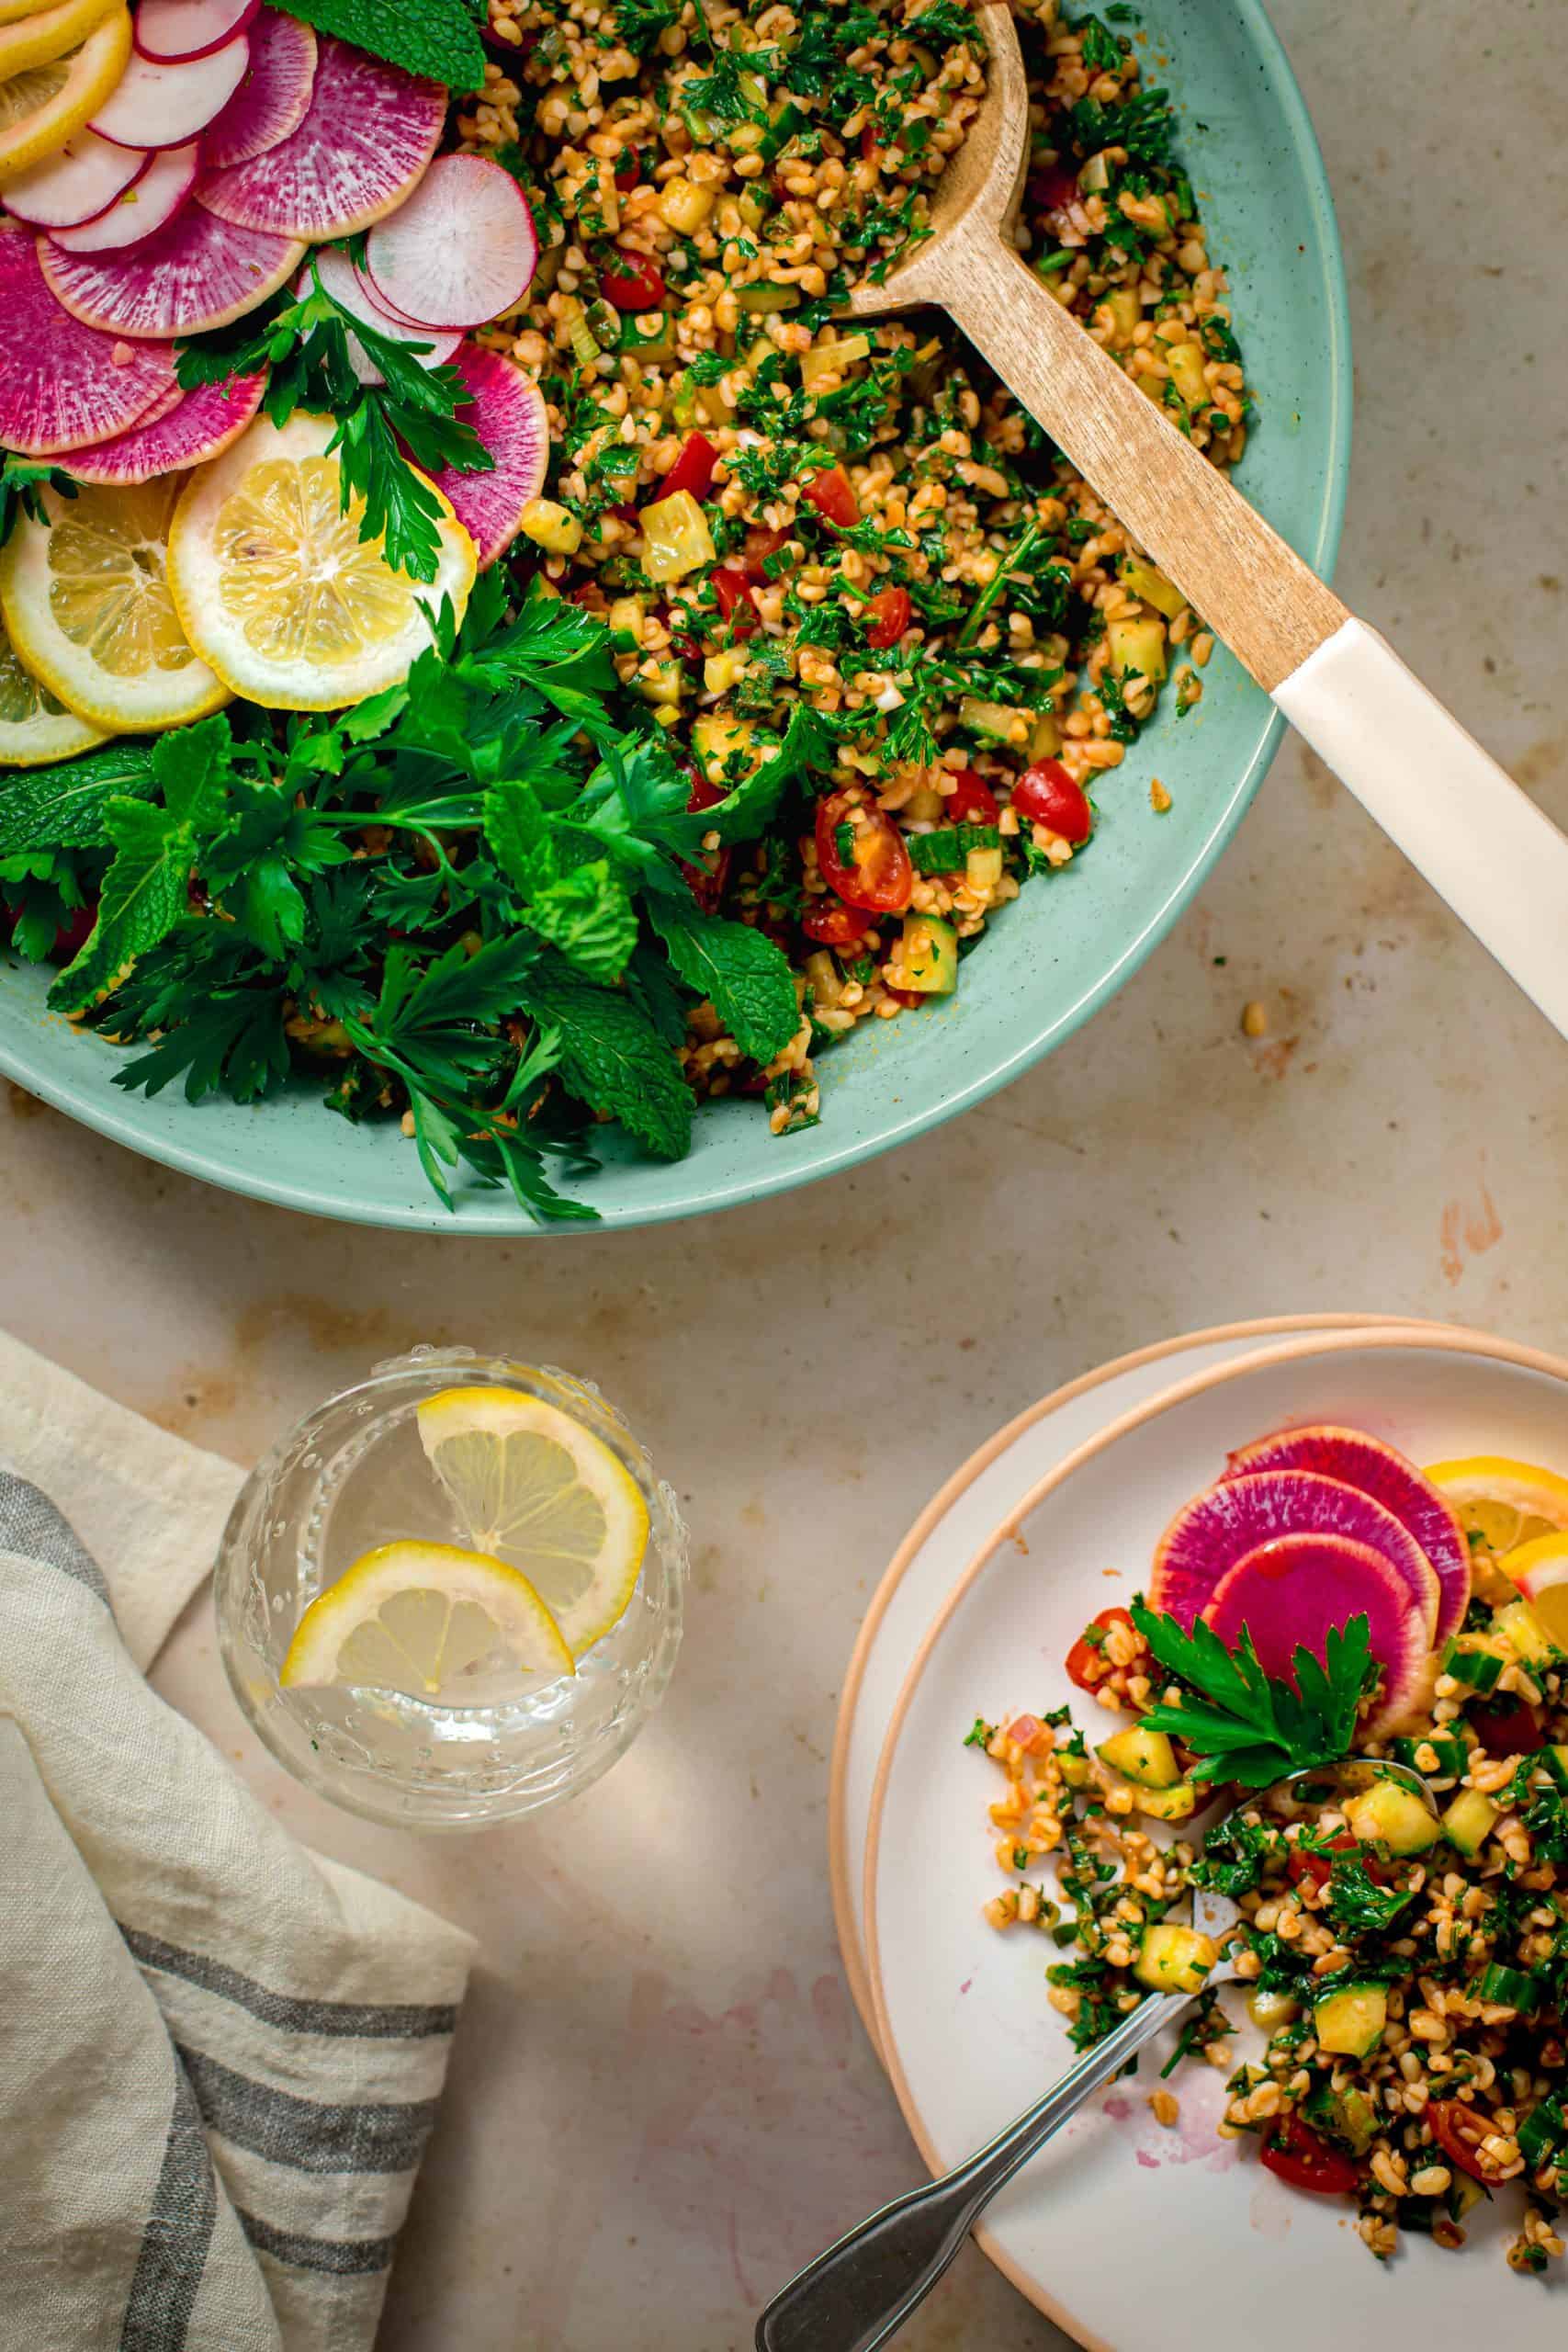 Bulgur salad in a large bowl with a salad spoon and a small plate with salad on it